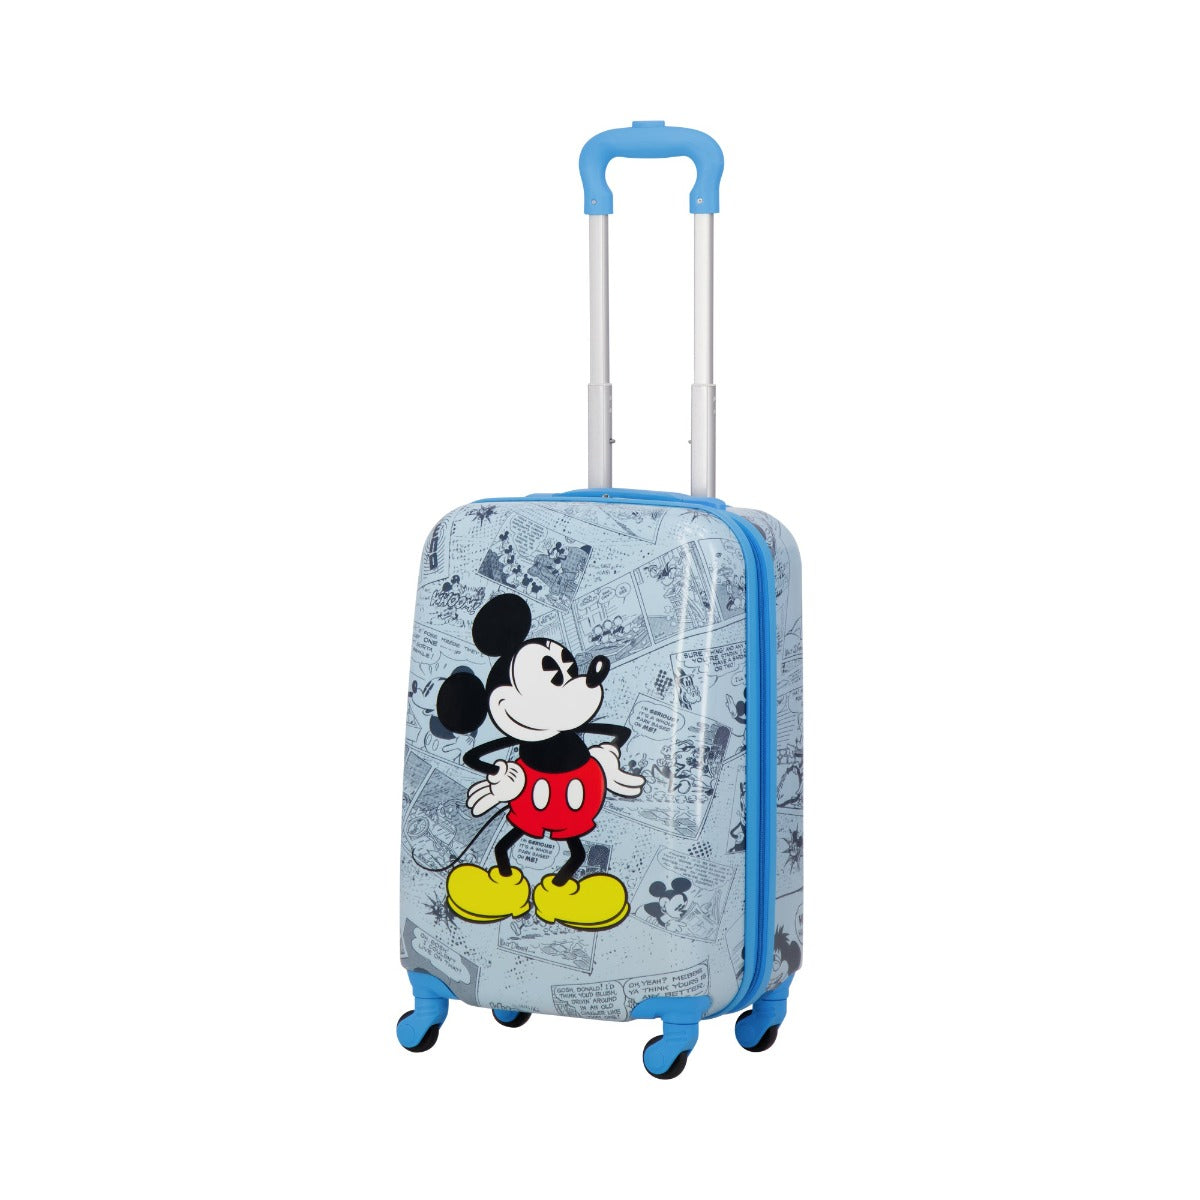 Blue Disney Heritage Mikey Mouse matching 2 piece set - 21" carry-on luggage for kids